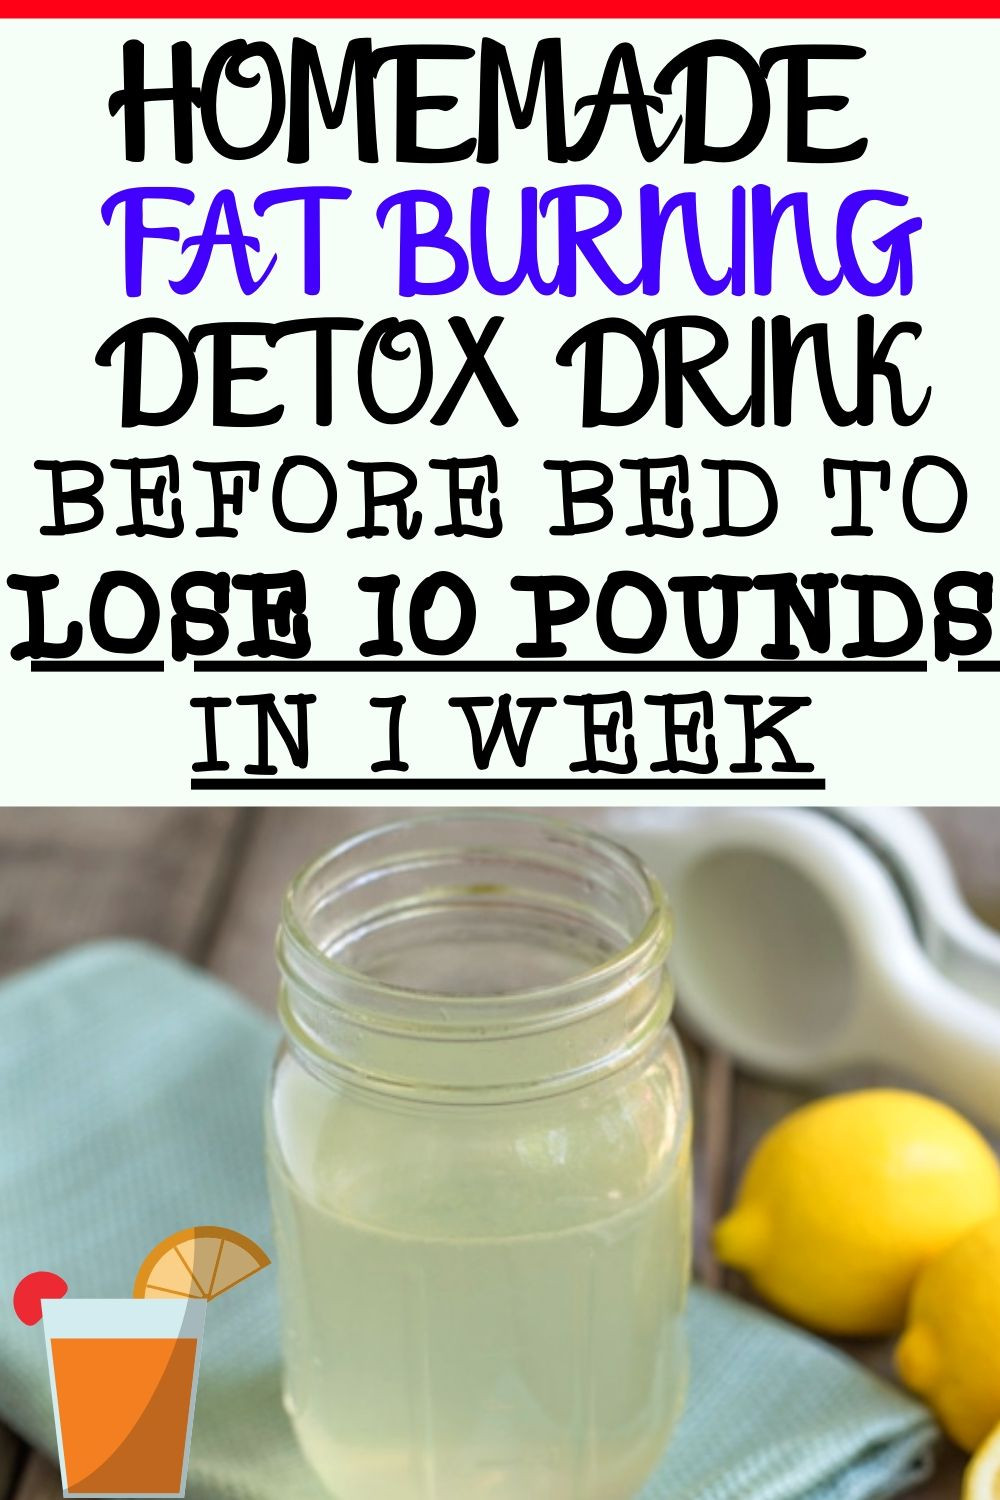 Before Bed Detox Drink Burn Belly Fat
 Fat Burning Detox Drink Before Bed To Lose 10 Pounds In 1